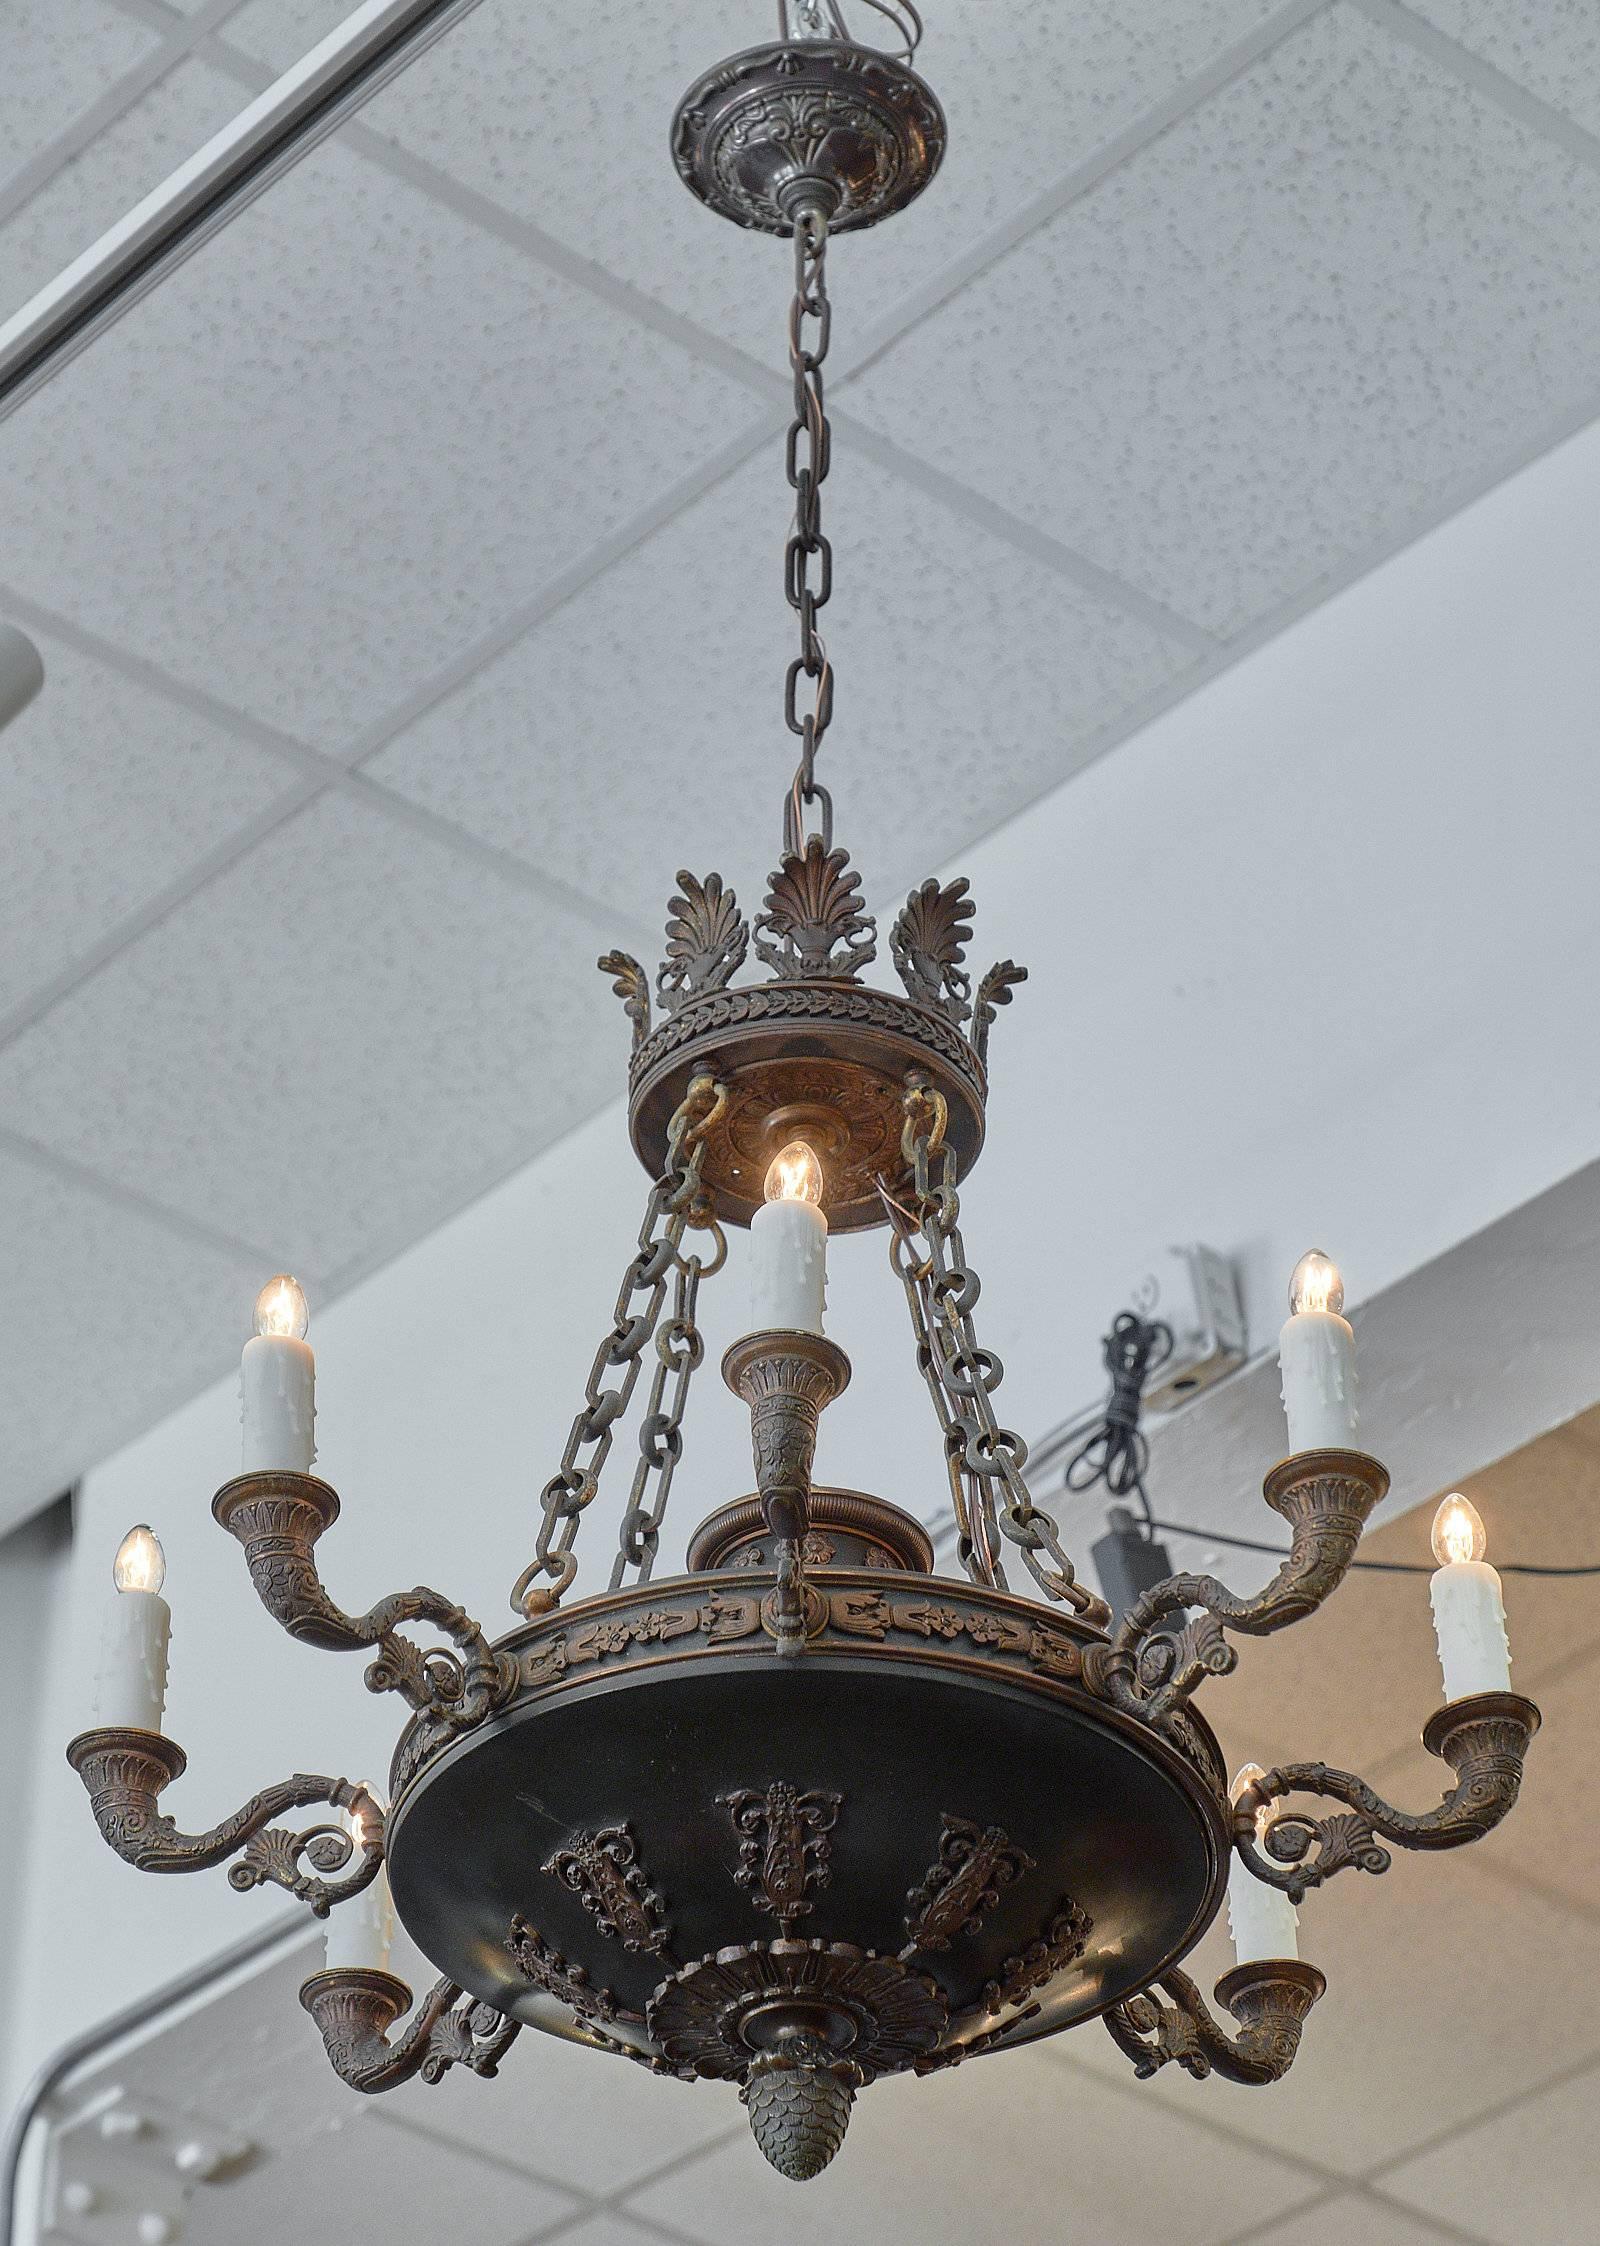 Antique Empire style bronze chandelier from France with eight cornucopia branches, acanthus leaves and stylized floral decor throughout. It has been professionally wired to fit US standards.